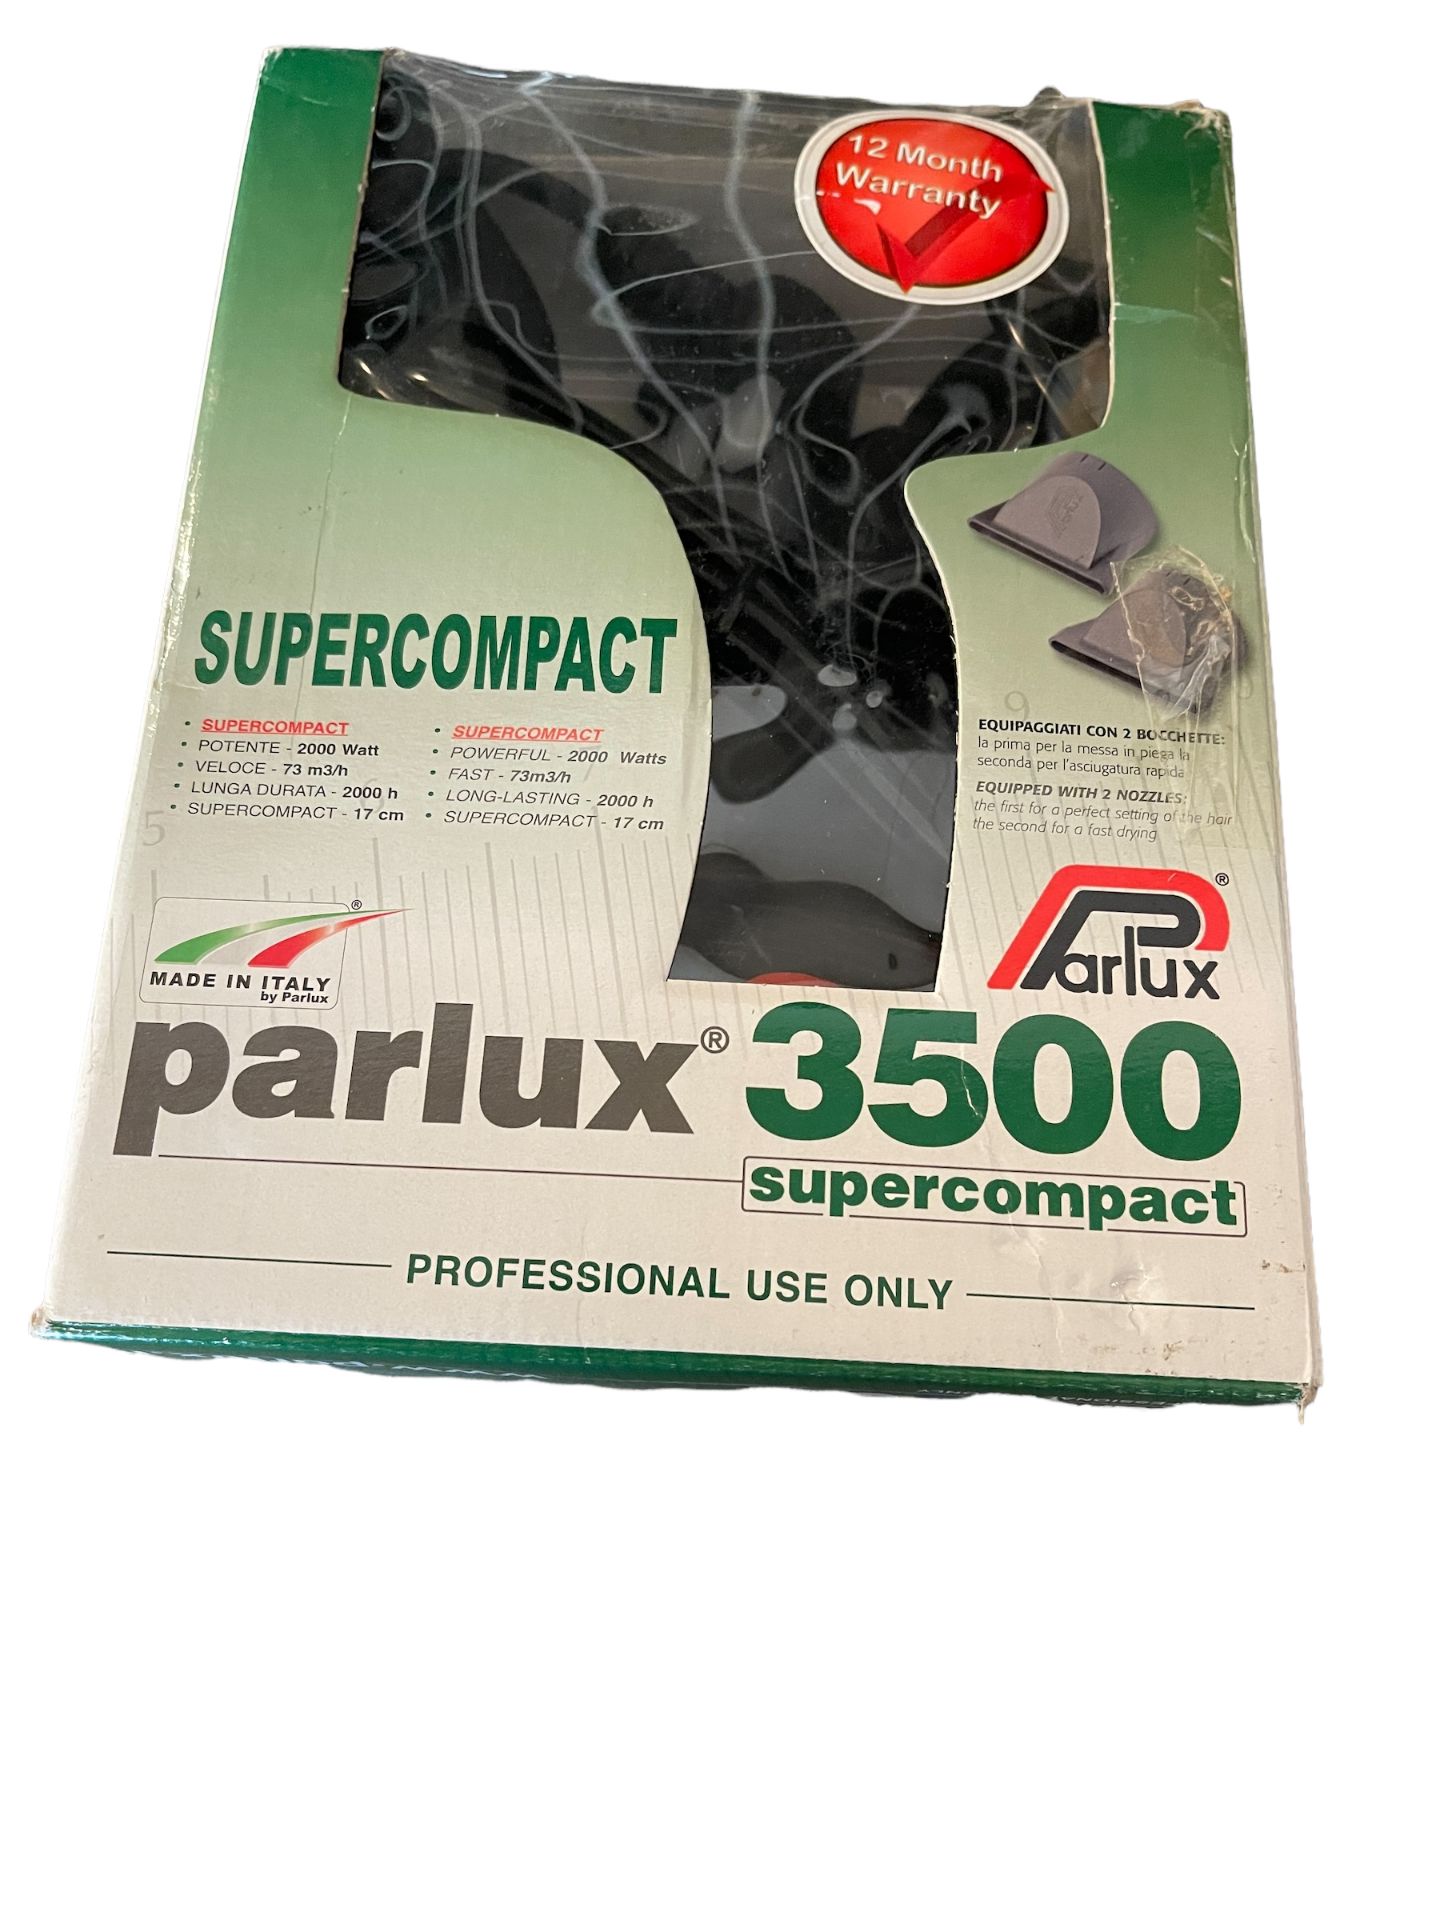 Parlux 3500 Supercompact Hair Dryer Professional Black - Image 6 of 11